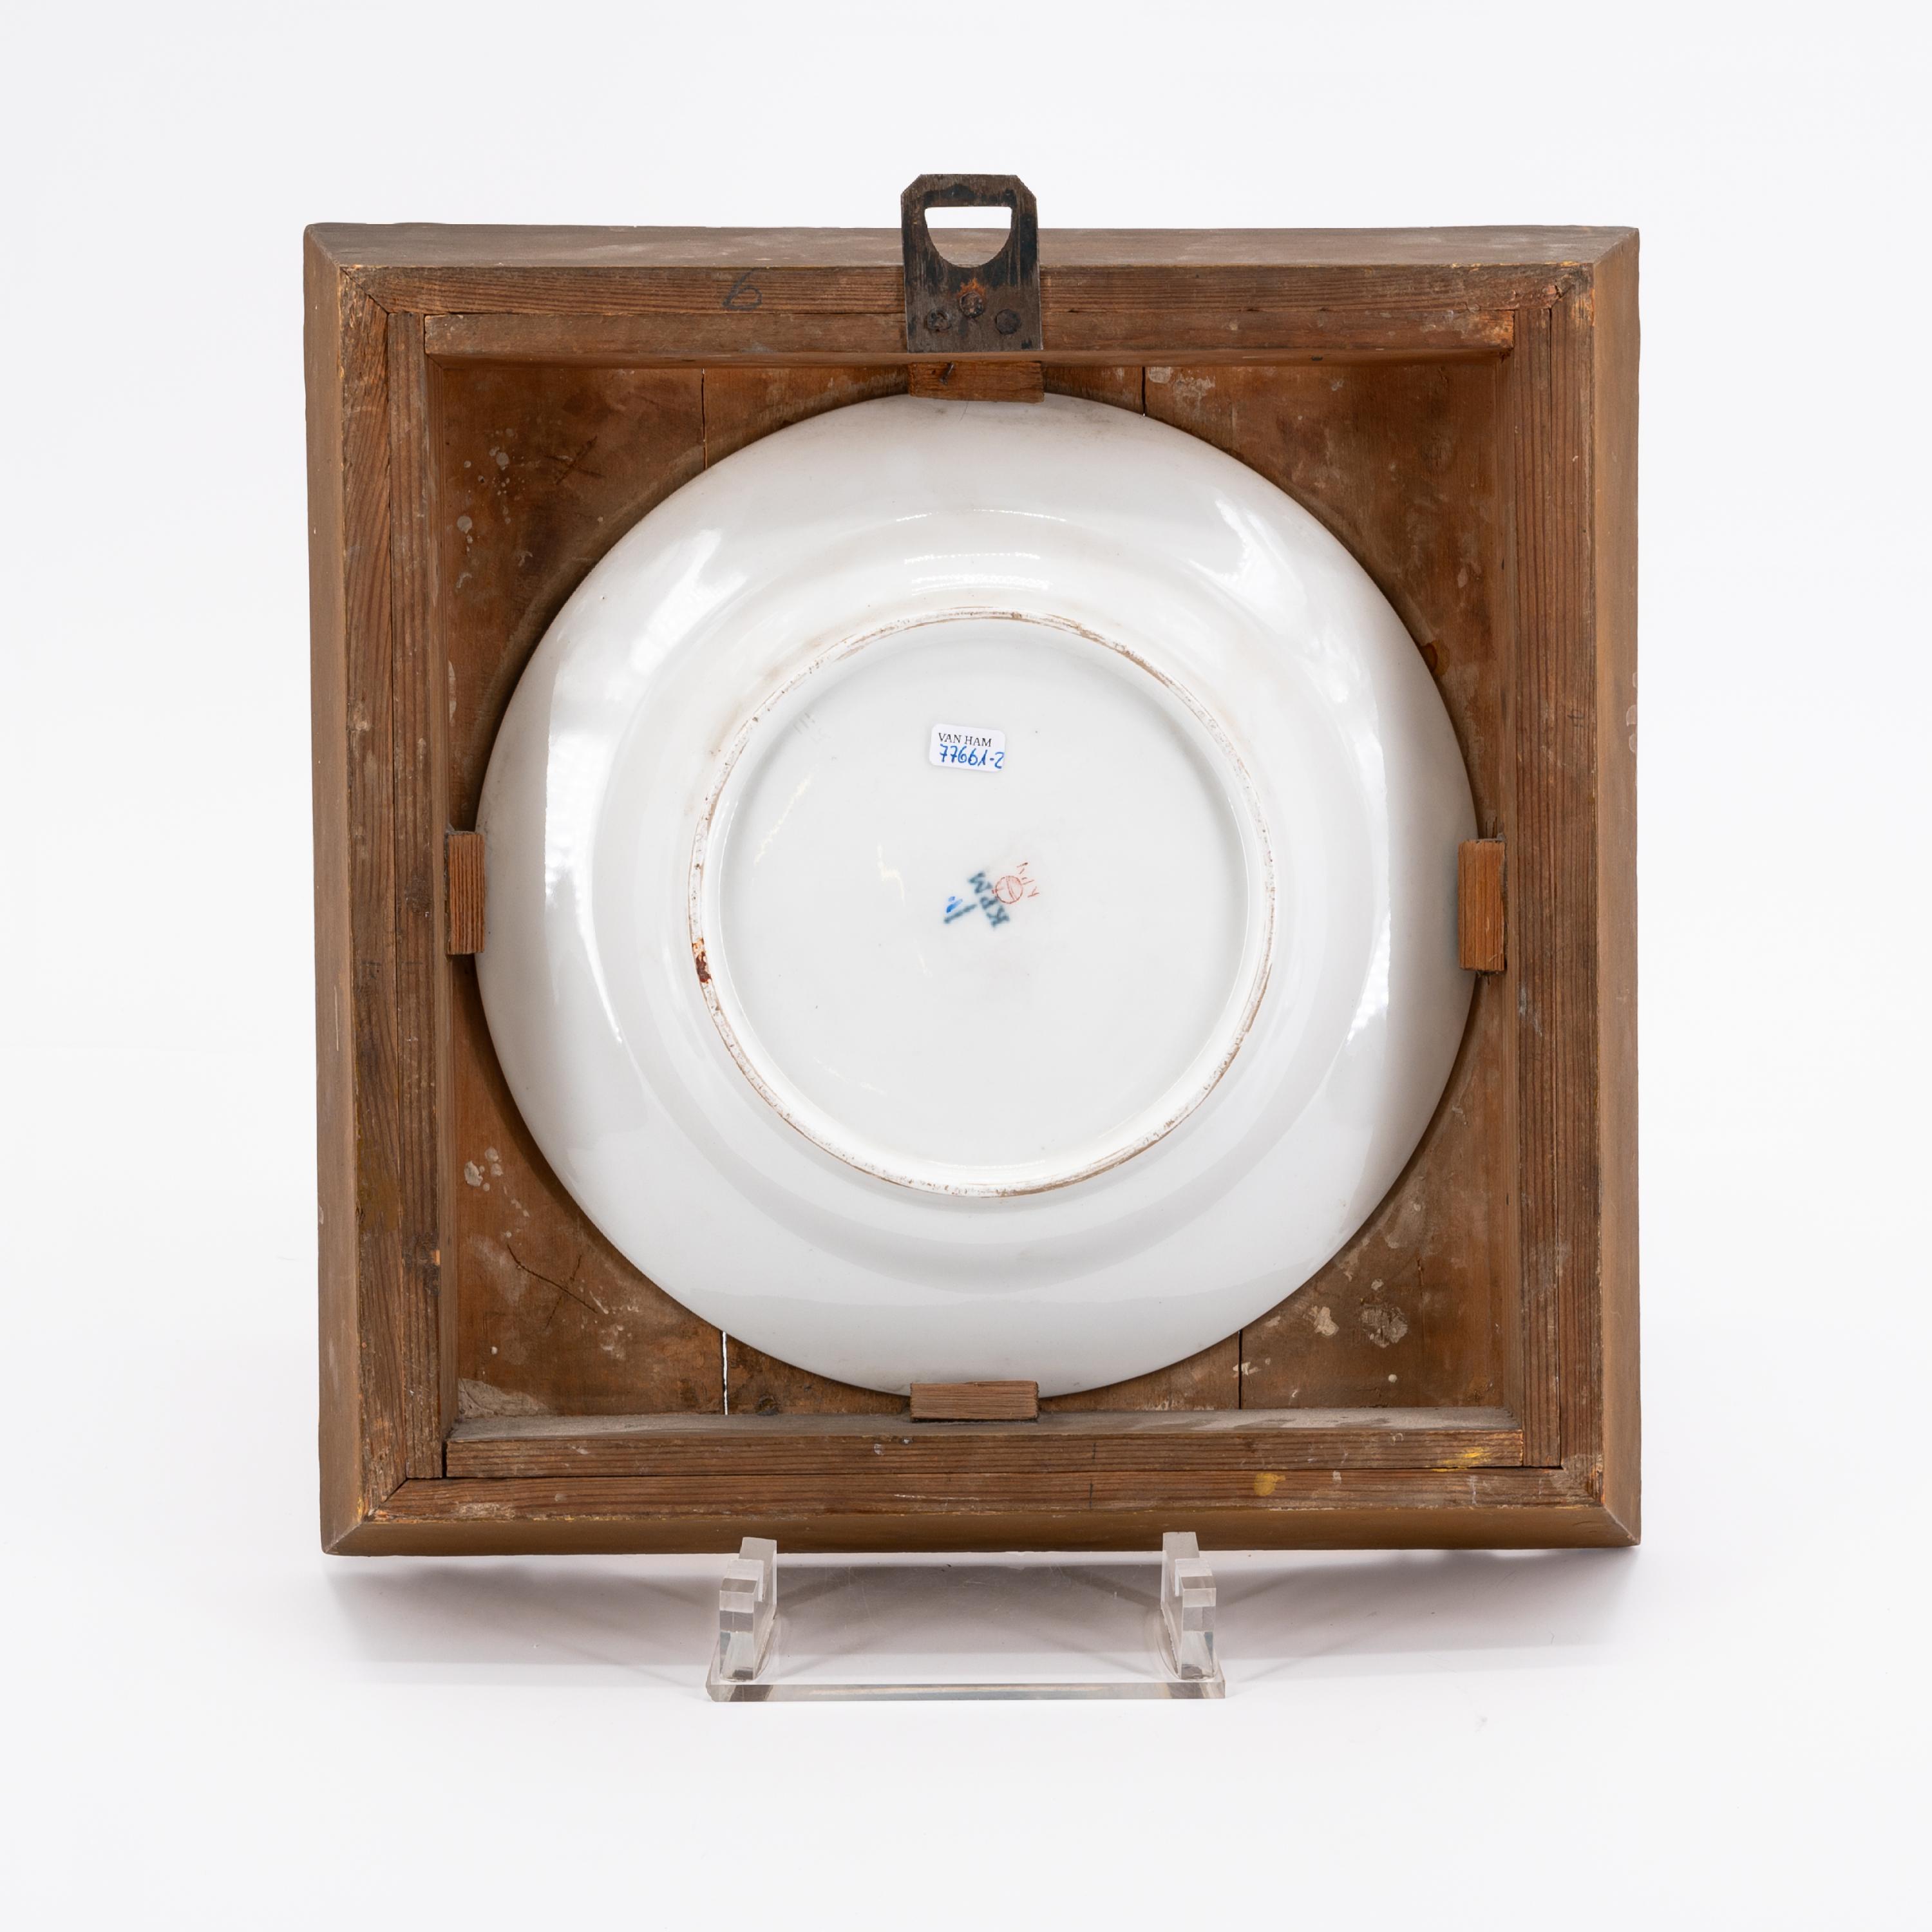 EXEPTIONAL SERIES OF TWELVE PORCELAIN PLATES WITH ROMANTIC VIEWS OF THE RHINE - Image 16 of 26